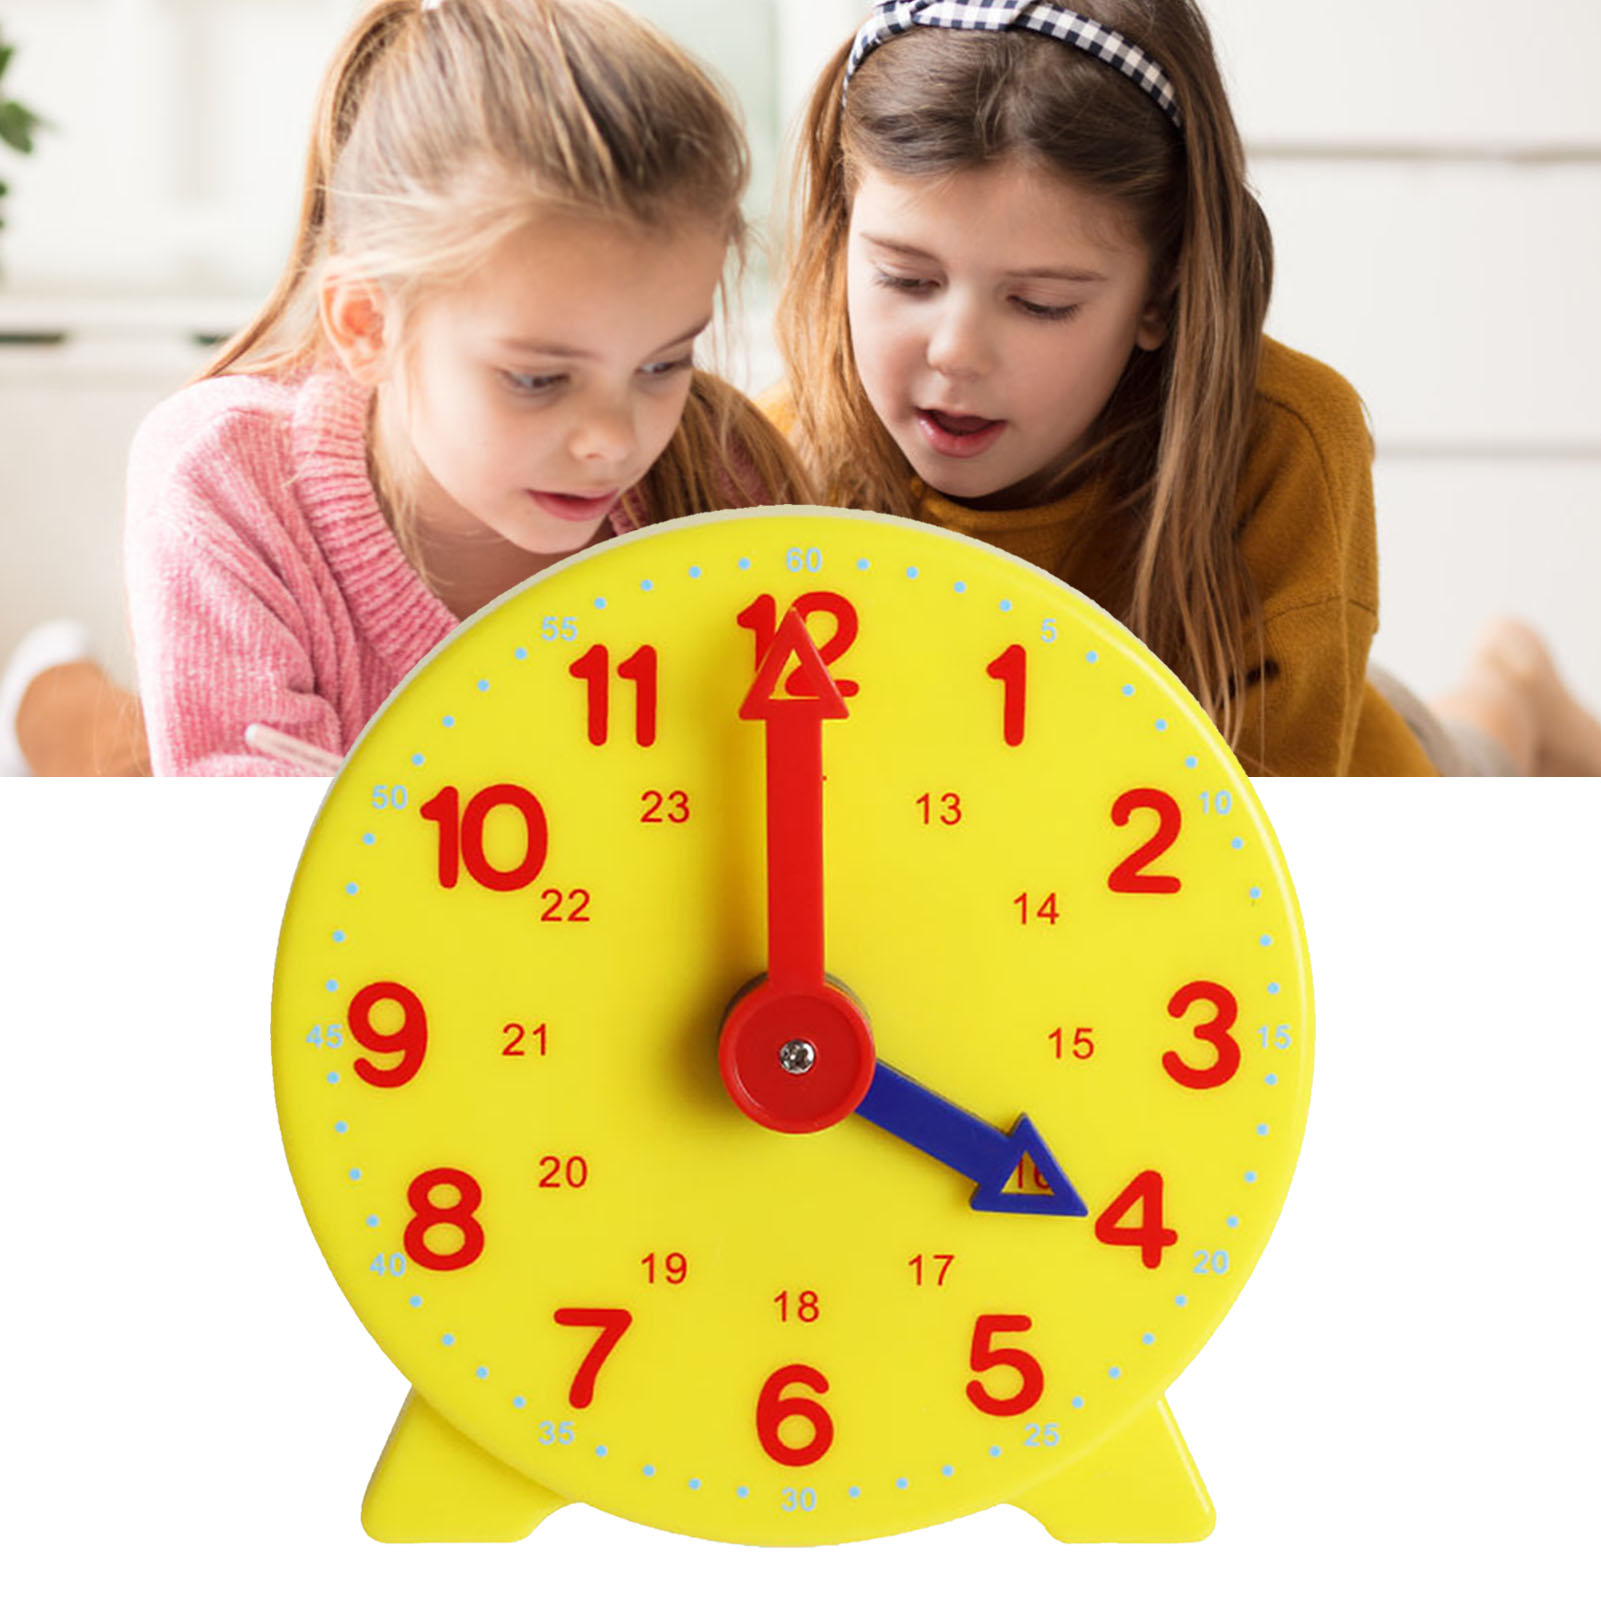 VEAREAR 10cm Plastic Clock Model Early Education Learning Kids Children Toy - image 2 of 6